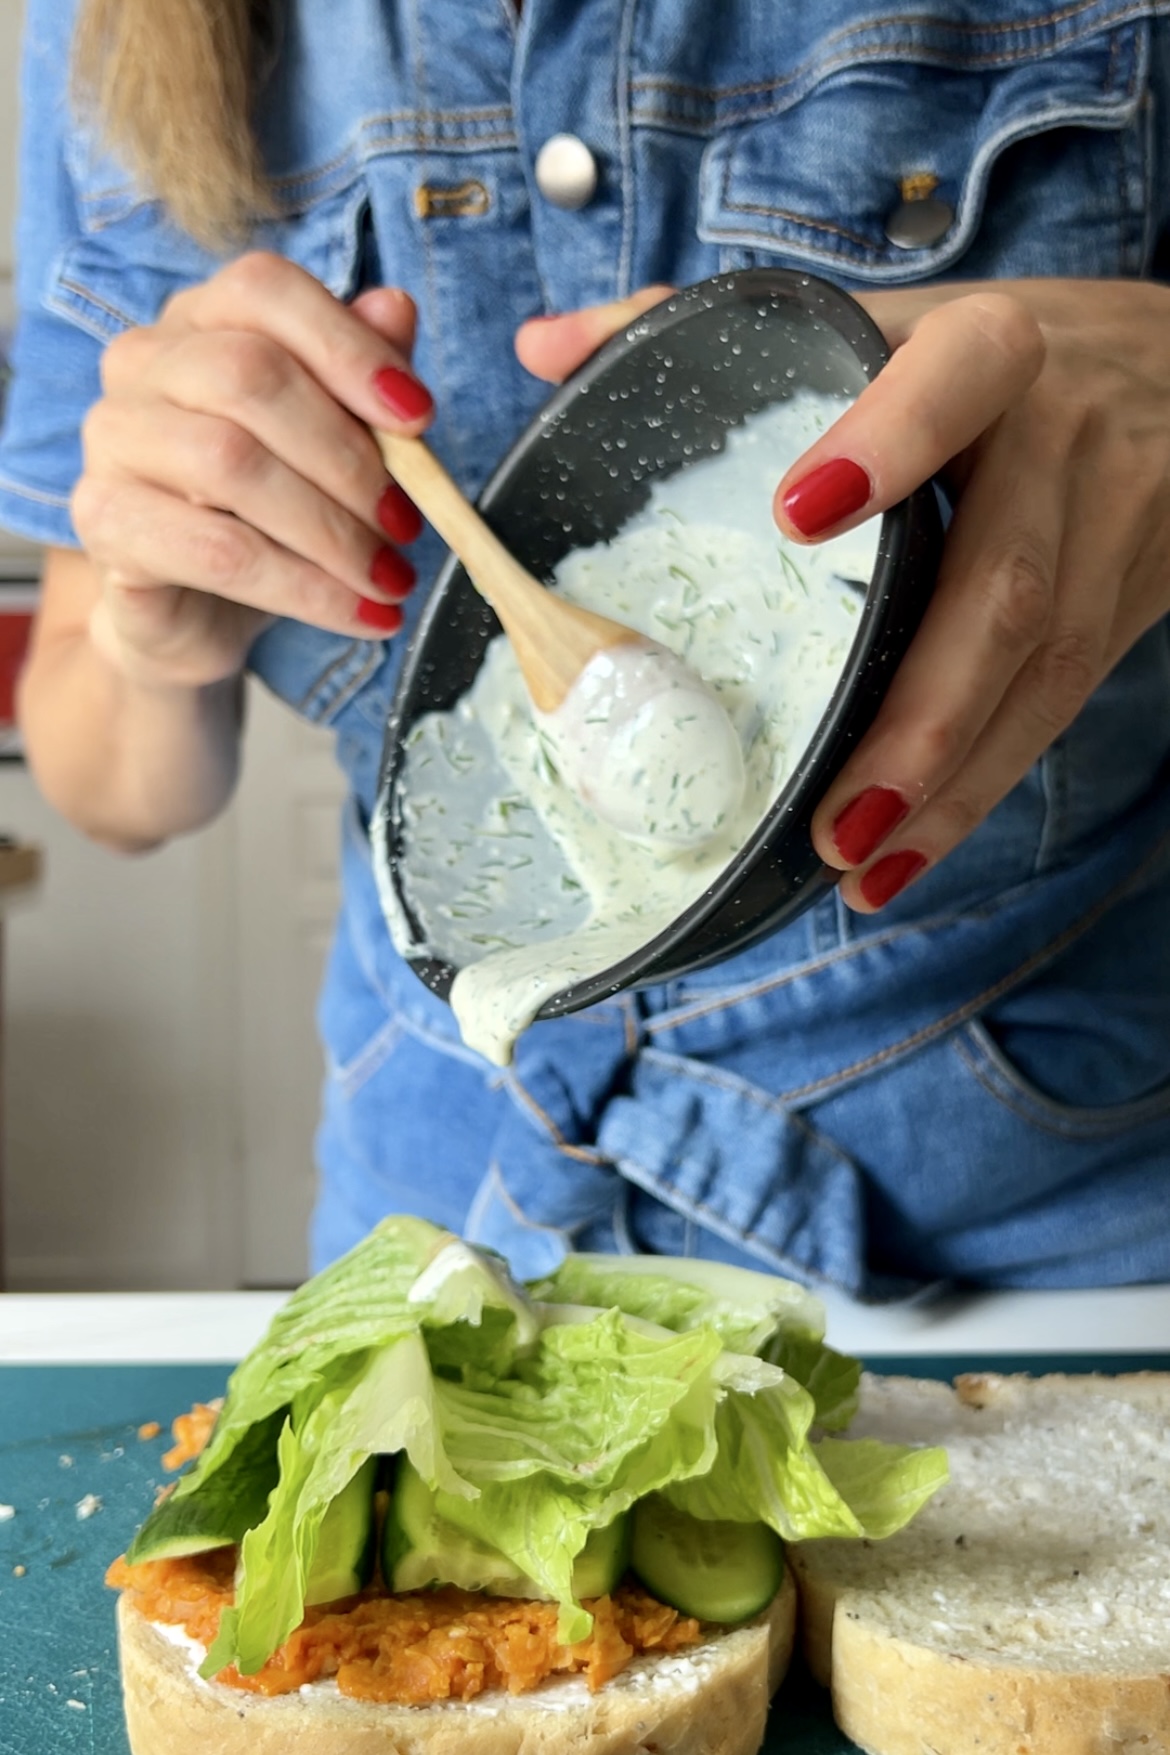 A person with red nail polish spreads creamy dressing from a black bowl onto a smashed chickpea and lettuce sandwich using a wooden spoon. The individual, clad in a blue denim shirt, stands by the kitchen counter, meticulously assembling their delicious meal.